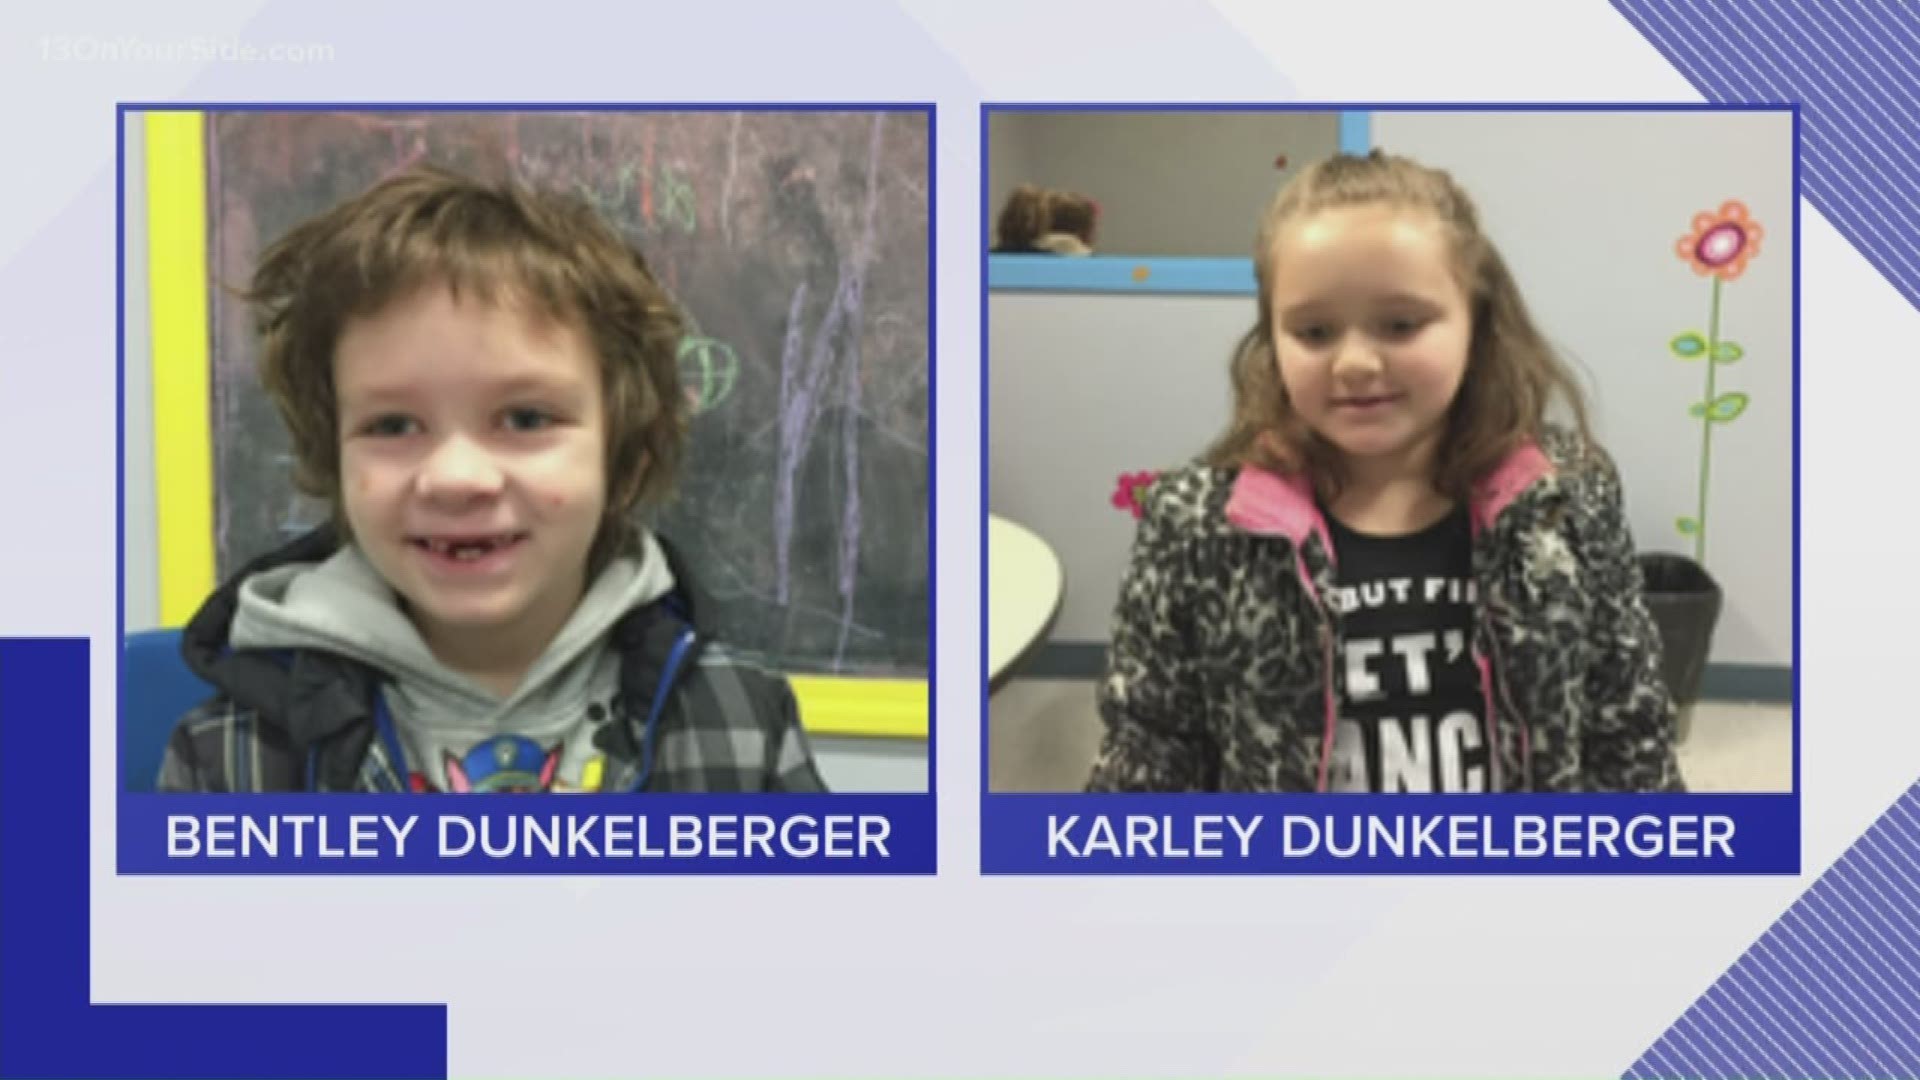 Police in Battle Creek are asking for the public's help to locate two children.